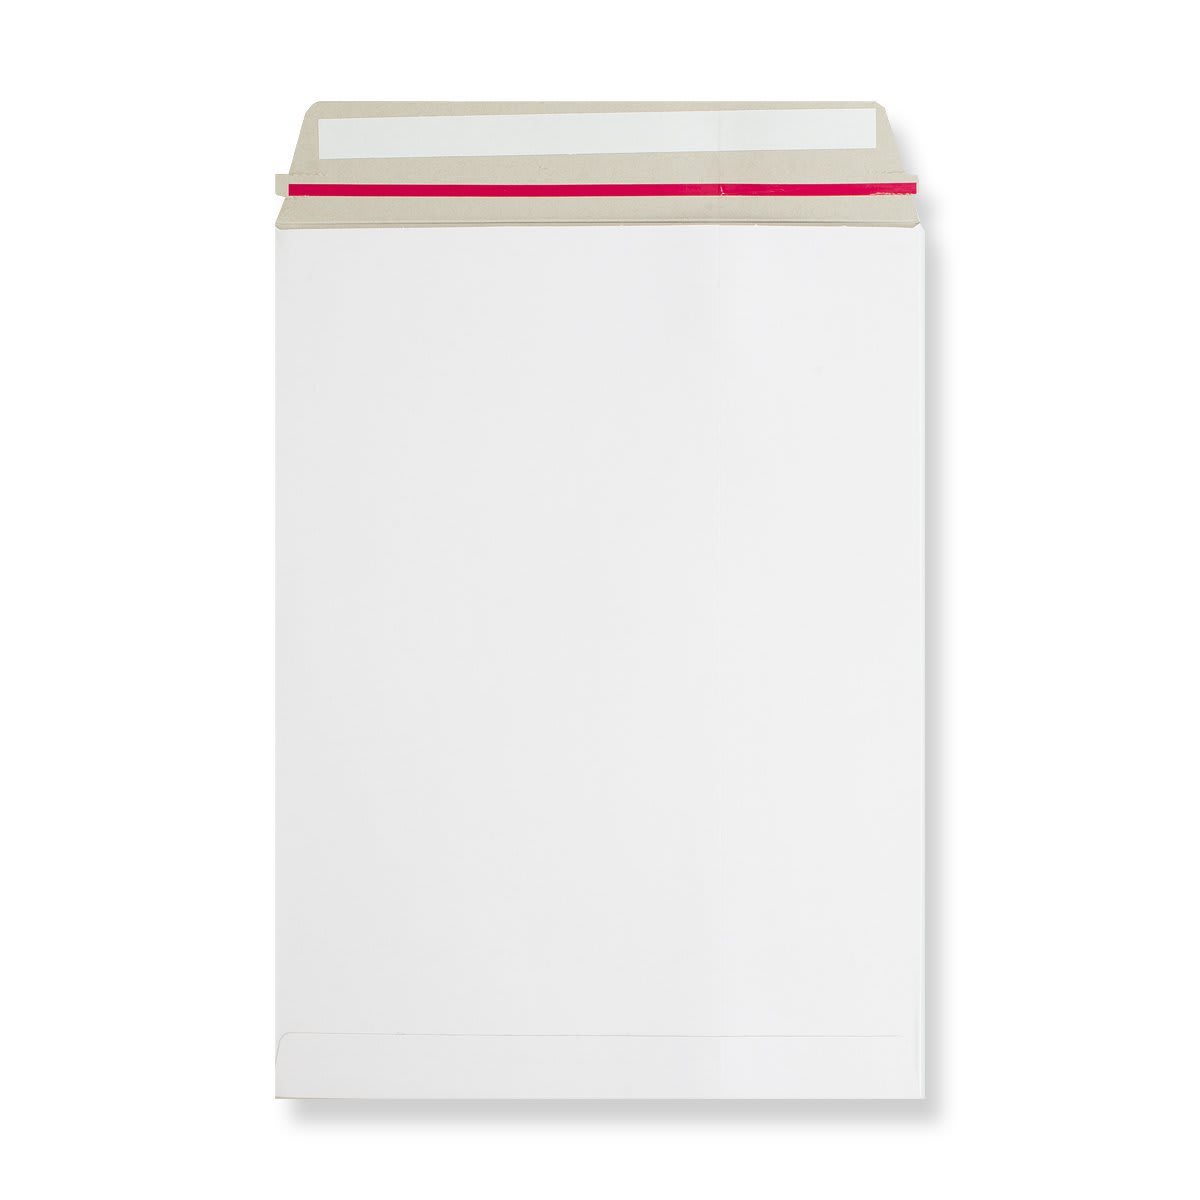 17.99 x 12.99 " White All Board Open Top Peel & Seal Plain 236lb Wove With Red Rippa Strip Envelopes